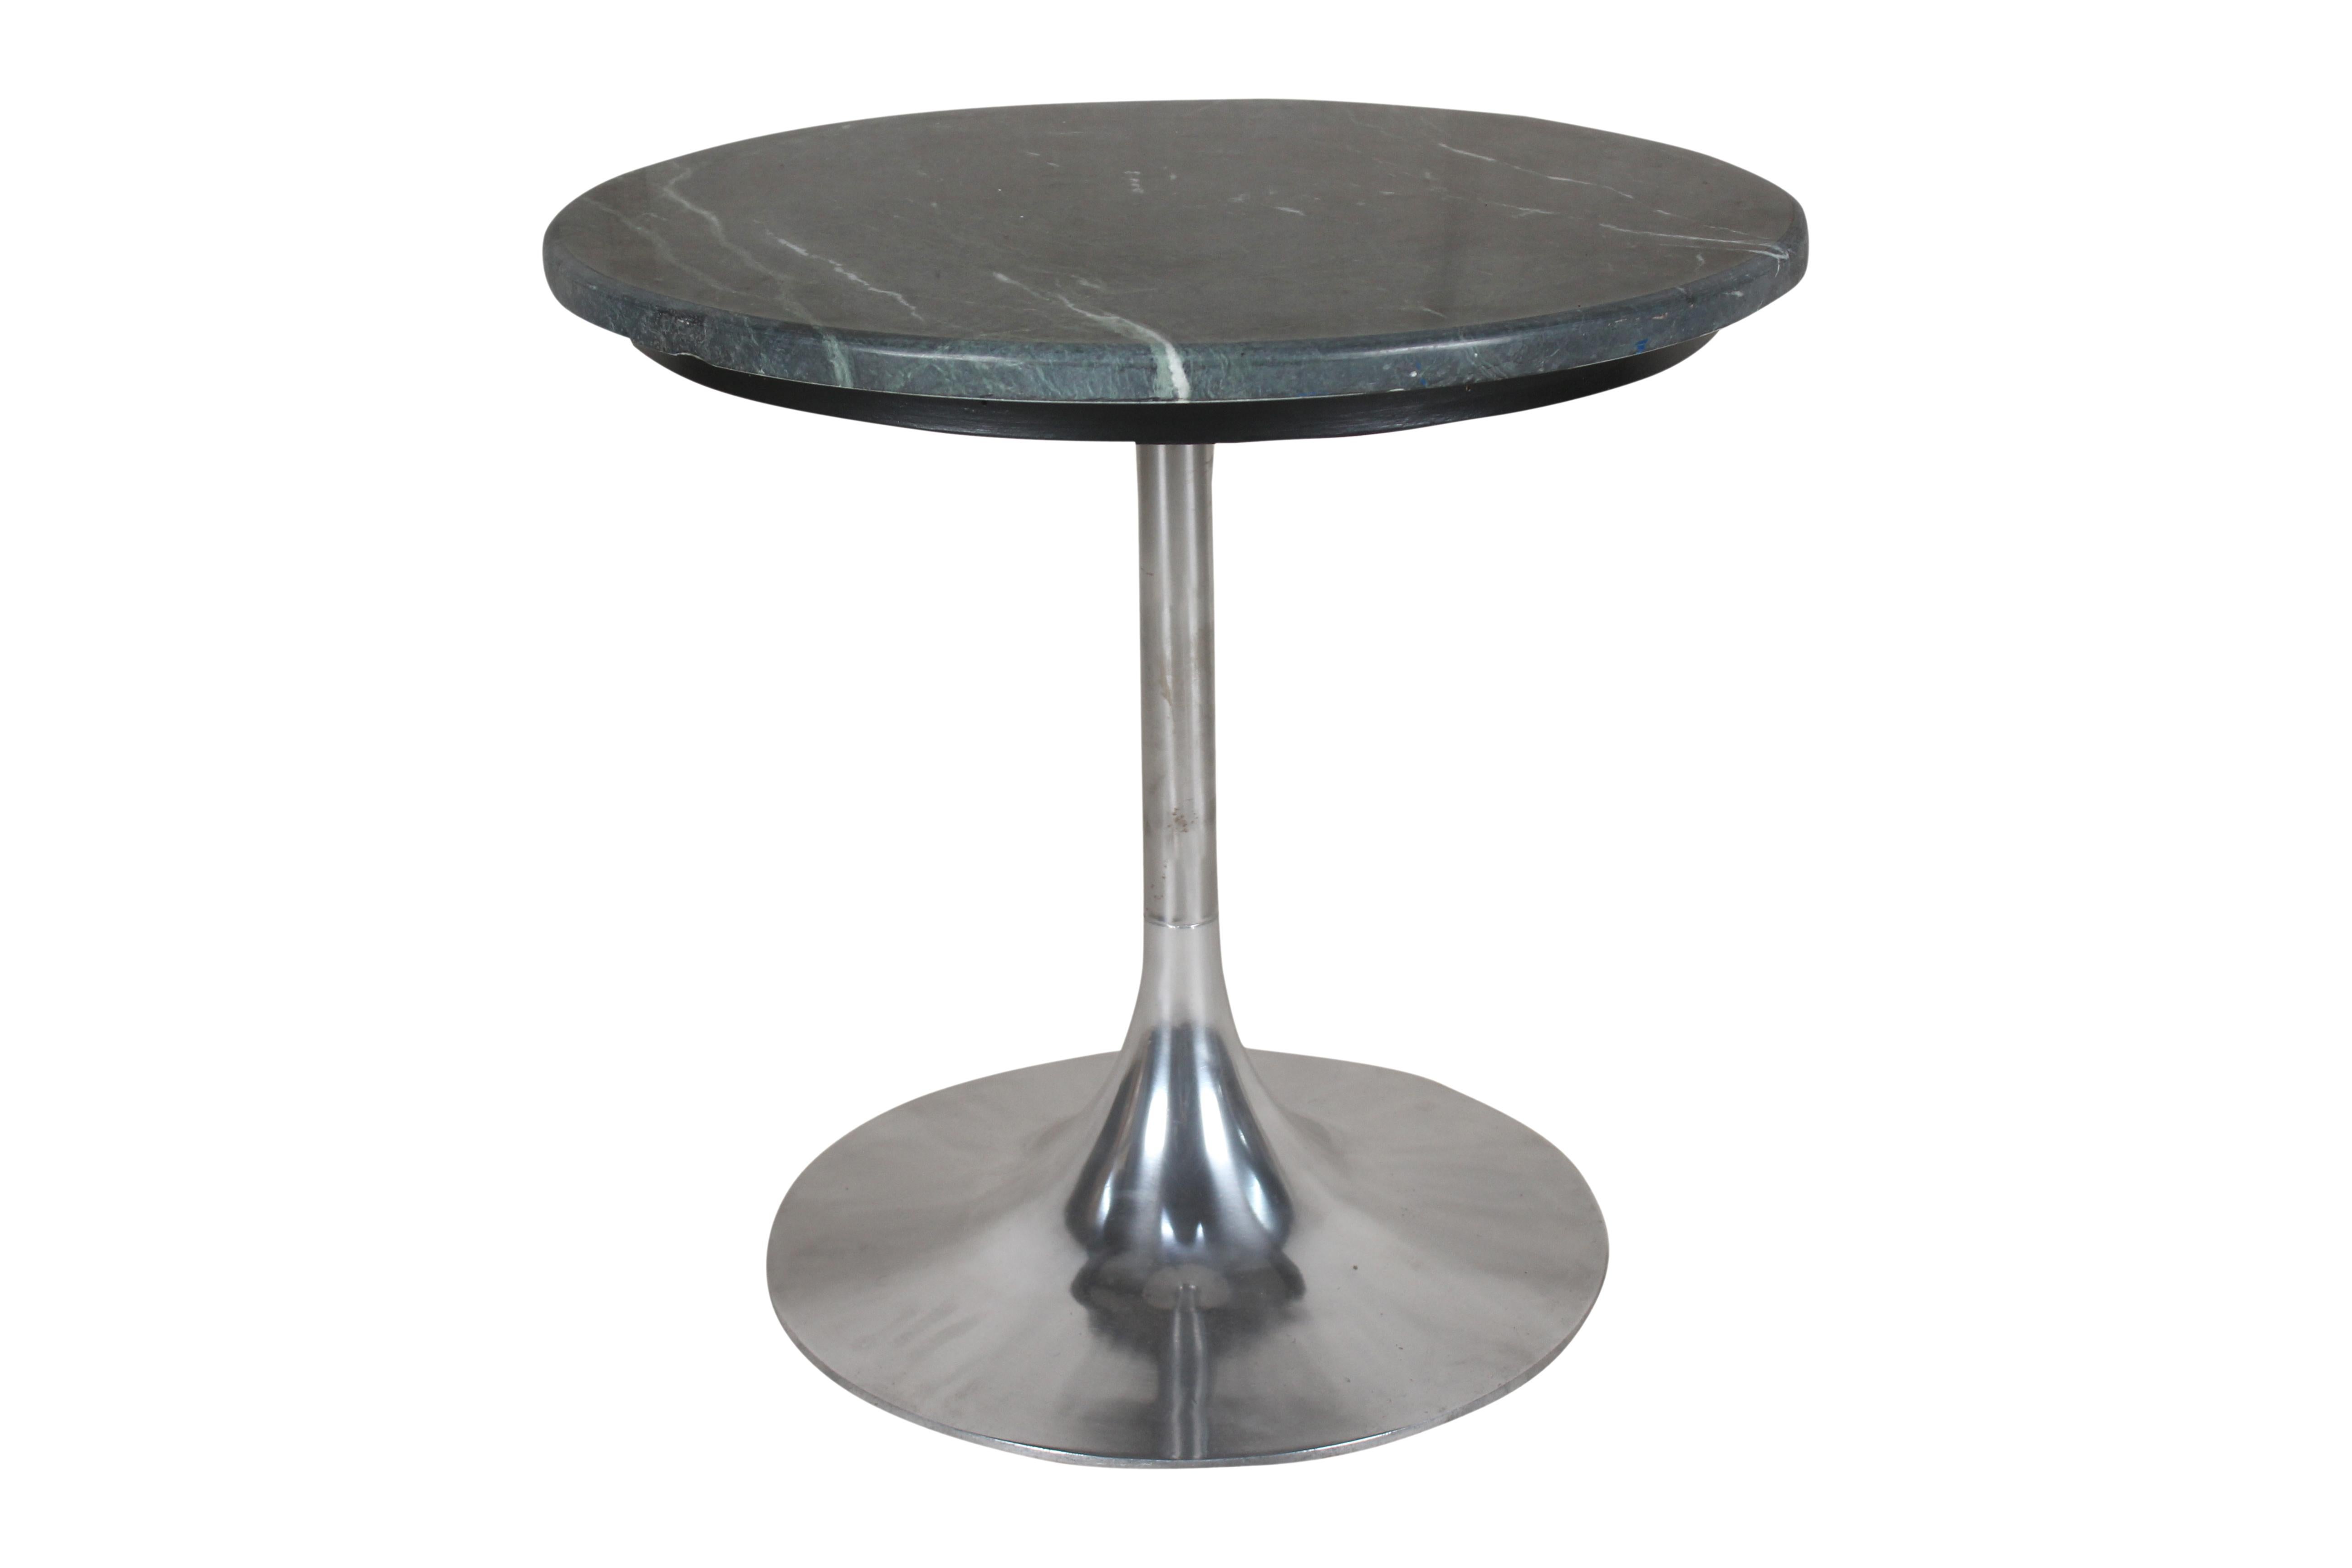 Two pieces to use as side or end tables or as a coffee table, featuring a chrome tulip or trumpet base. Green marble tops with lovely matrix. Priced individually since you may not need a pair. Mid-Century Modern.